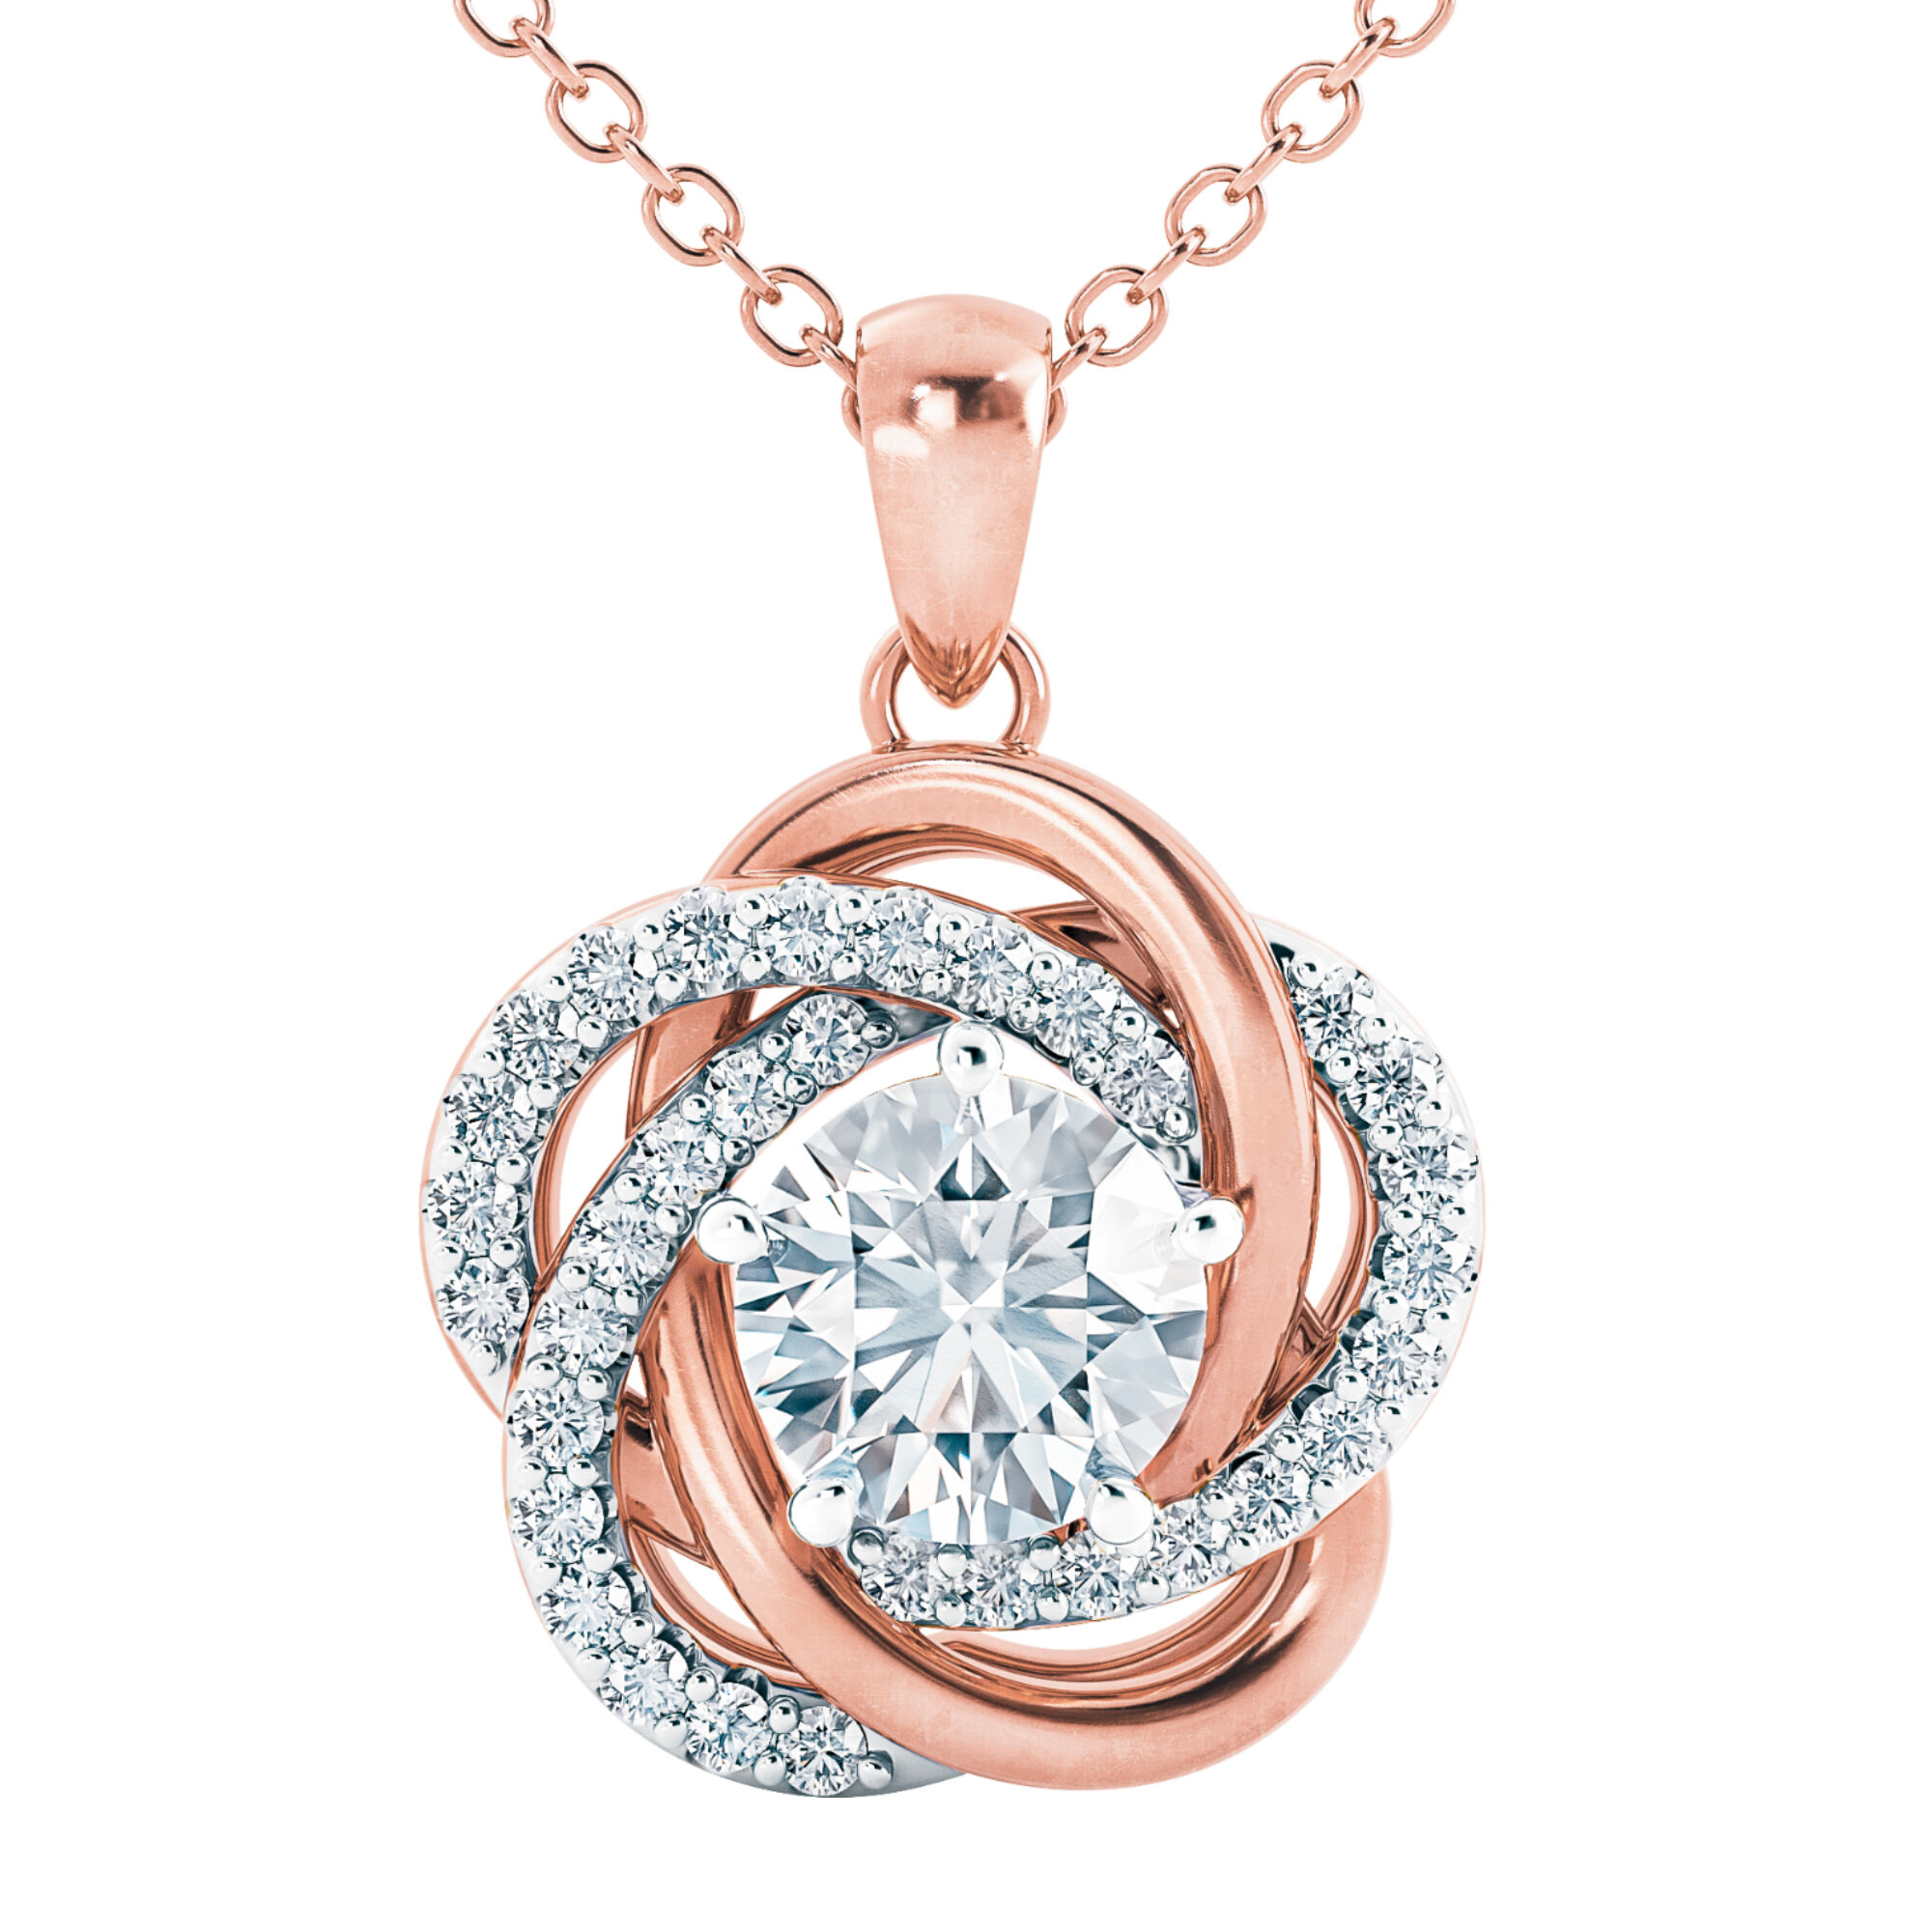 Perfectly Paired Love Knot Pendant with FREE Matching Earrings 10916 0010 b pendant